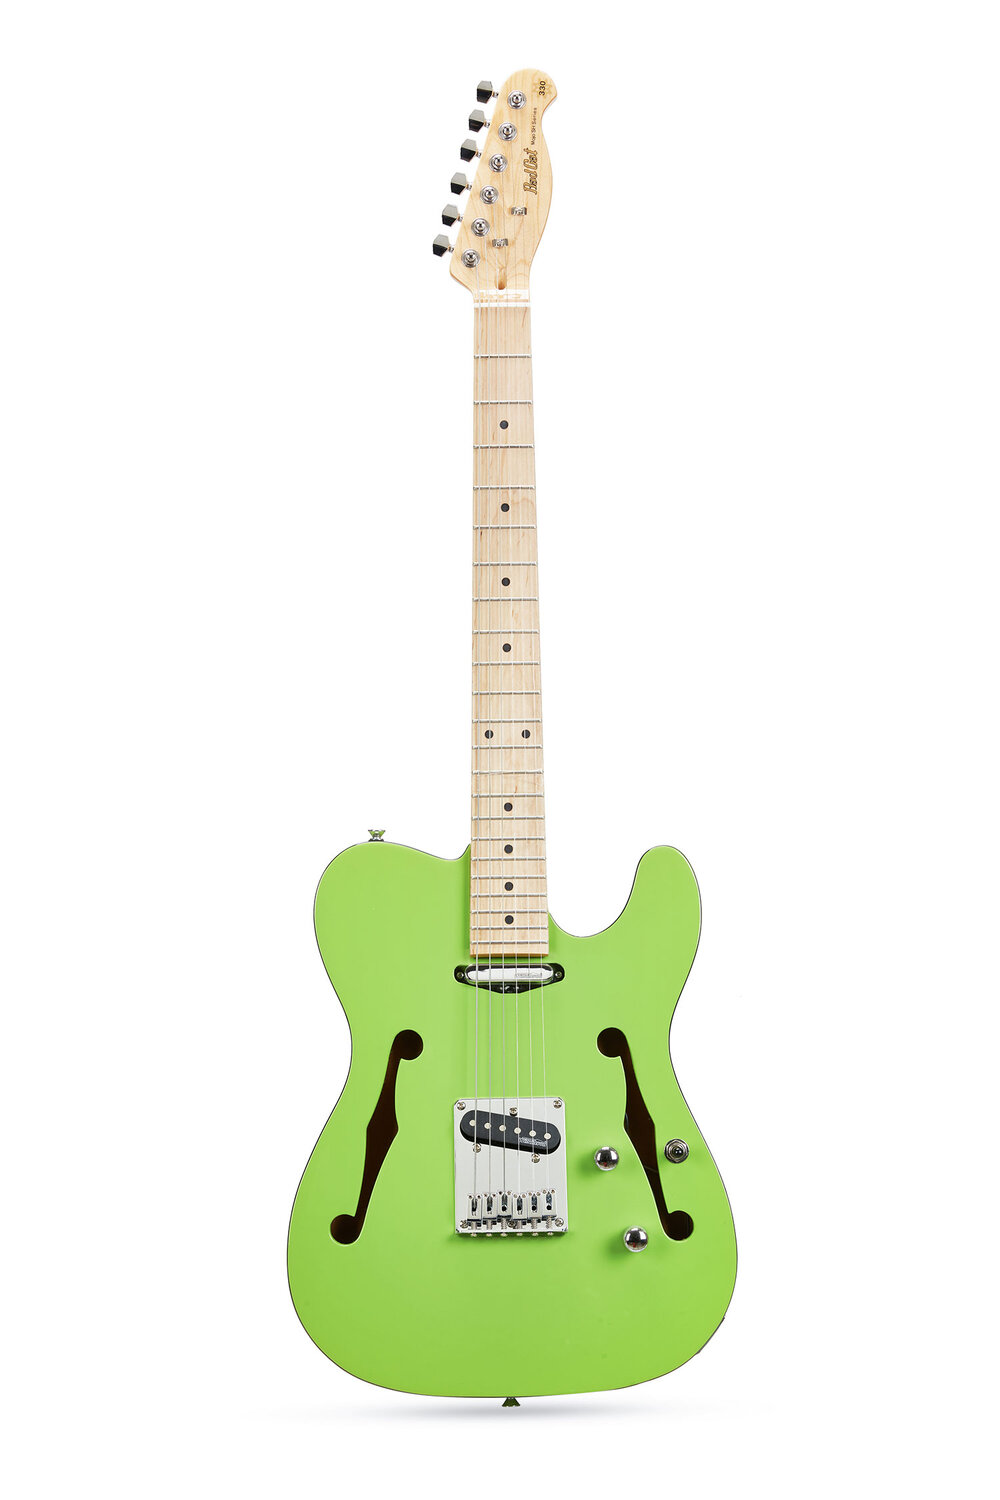 NEW BAD CAT SH-330 SEMI HOLLOW VINTAGE SURFING GREEN TELE STYLE 6 STRING  ELECTRIC GUITAR — BAD CAT INSTRUMENTS